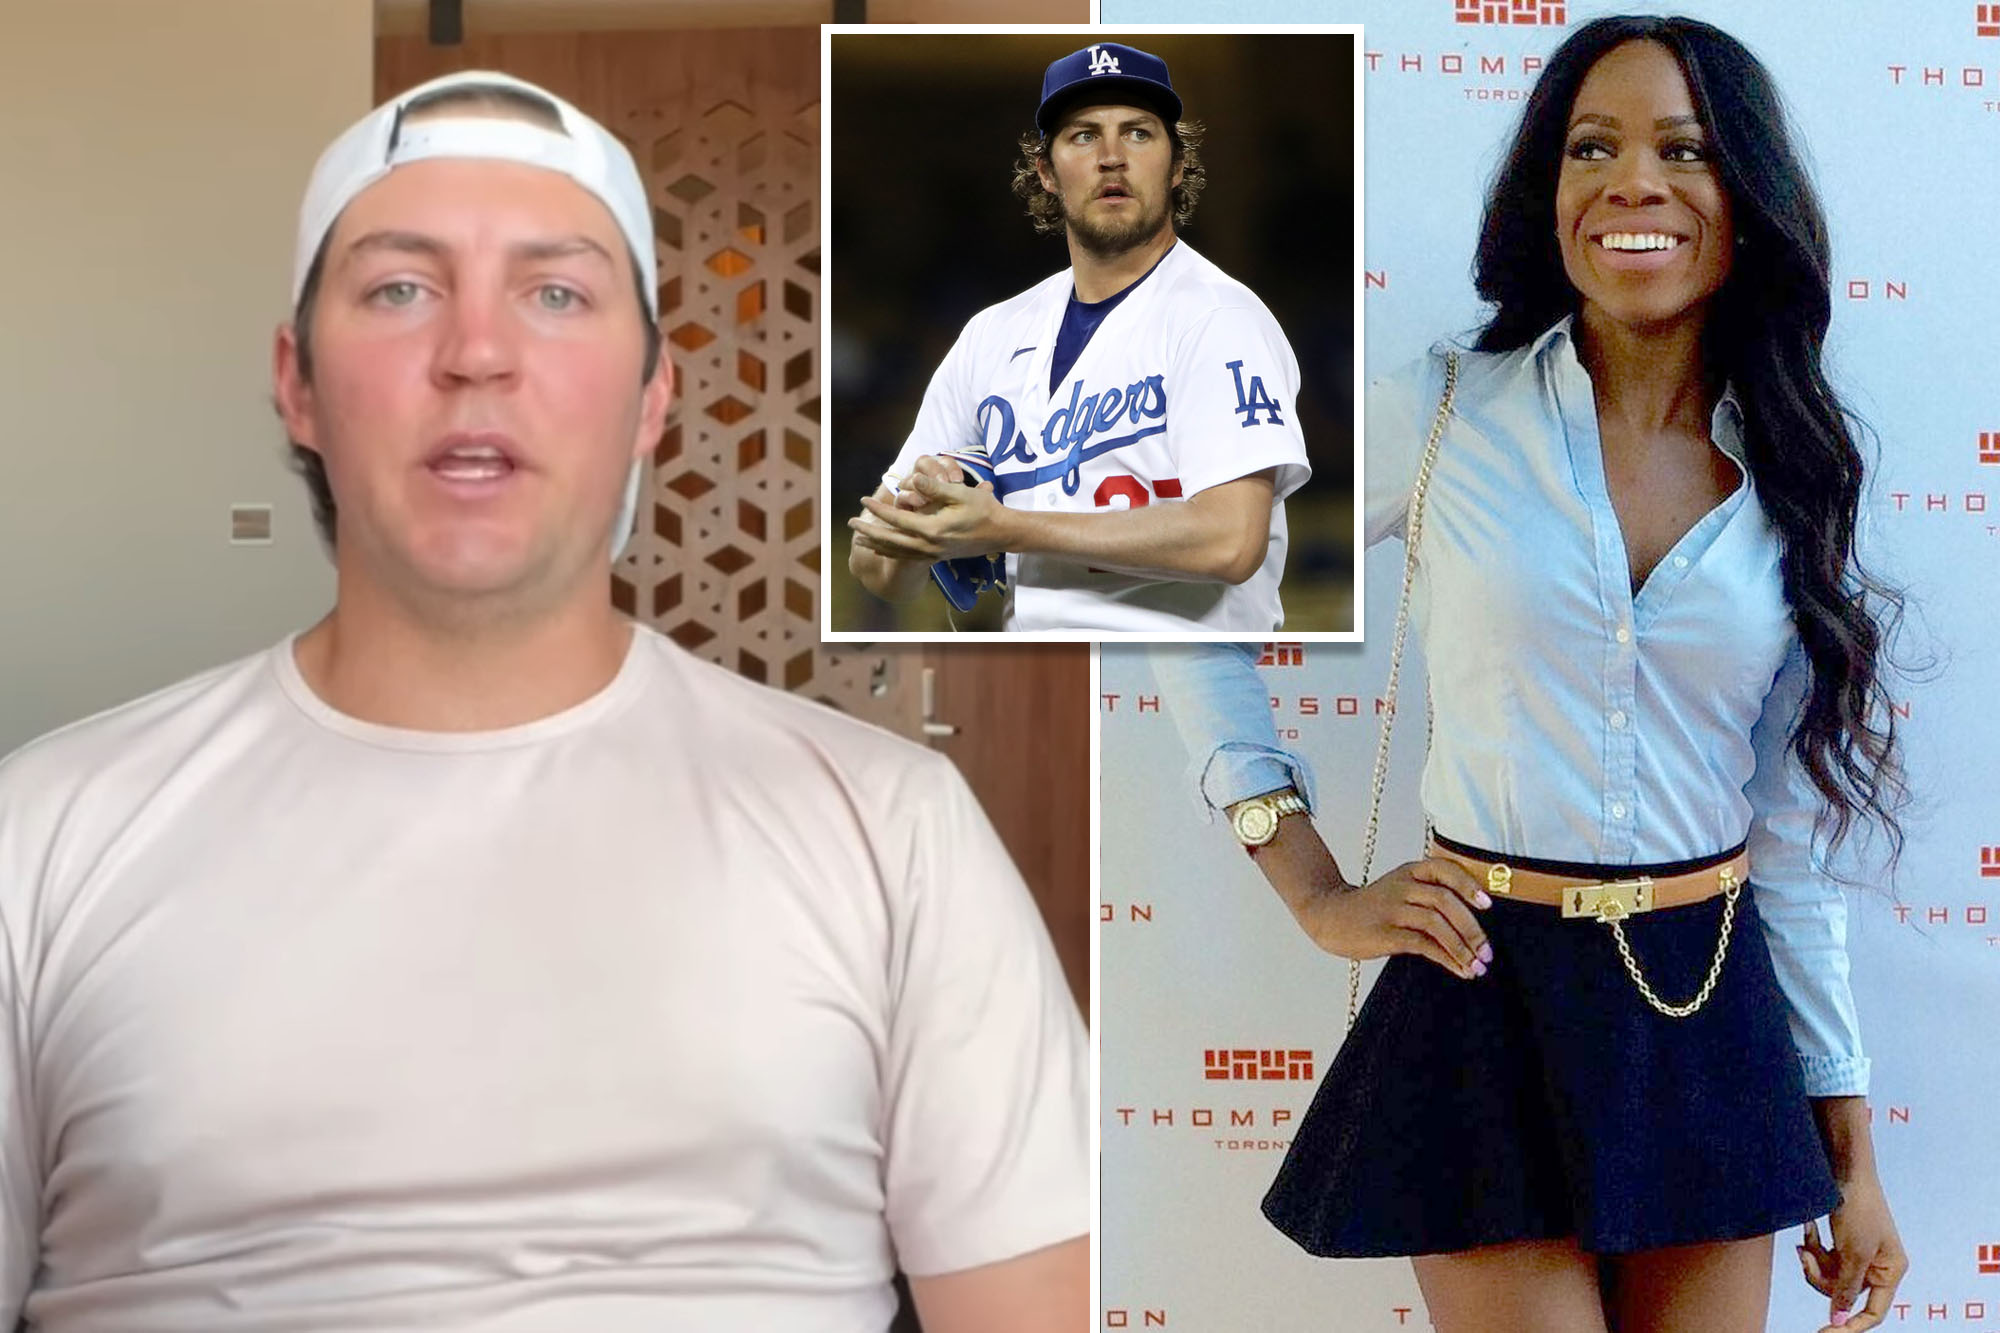 Lady who accused Trevor Bauer of sexual assault is charged with defrauding the former MLB star